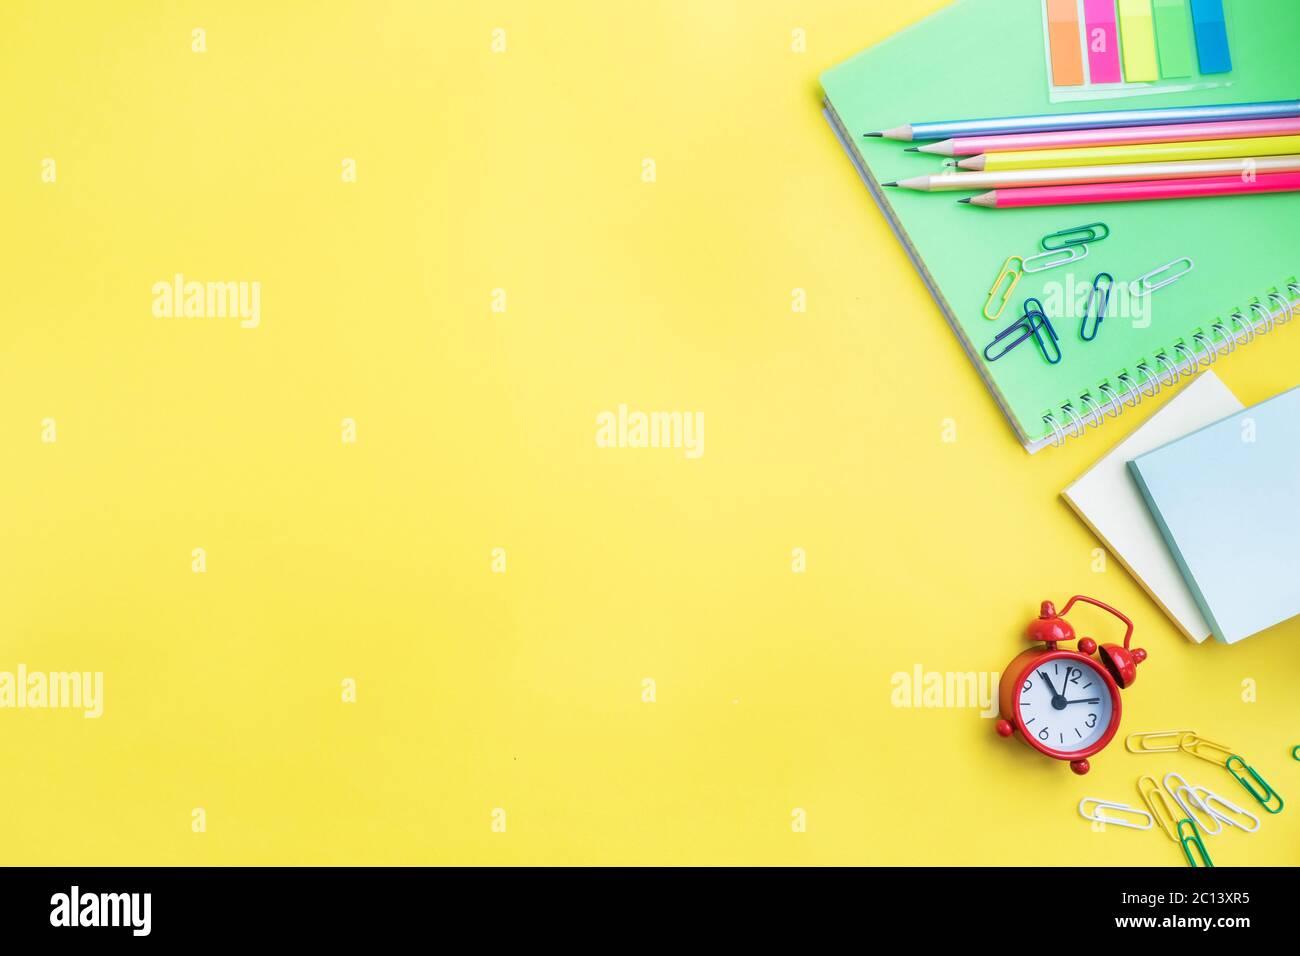 School supplies, notebooks pencils on yellow background with copy space Stock Photo